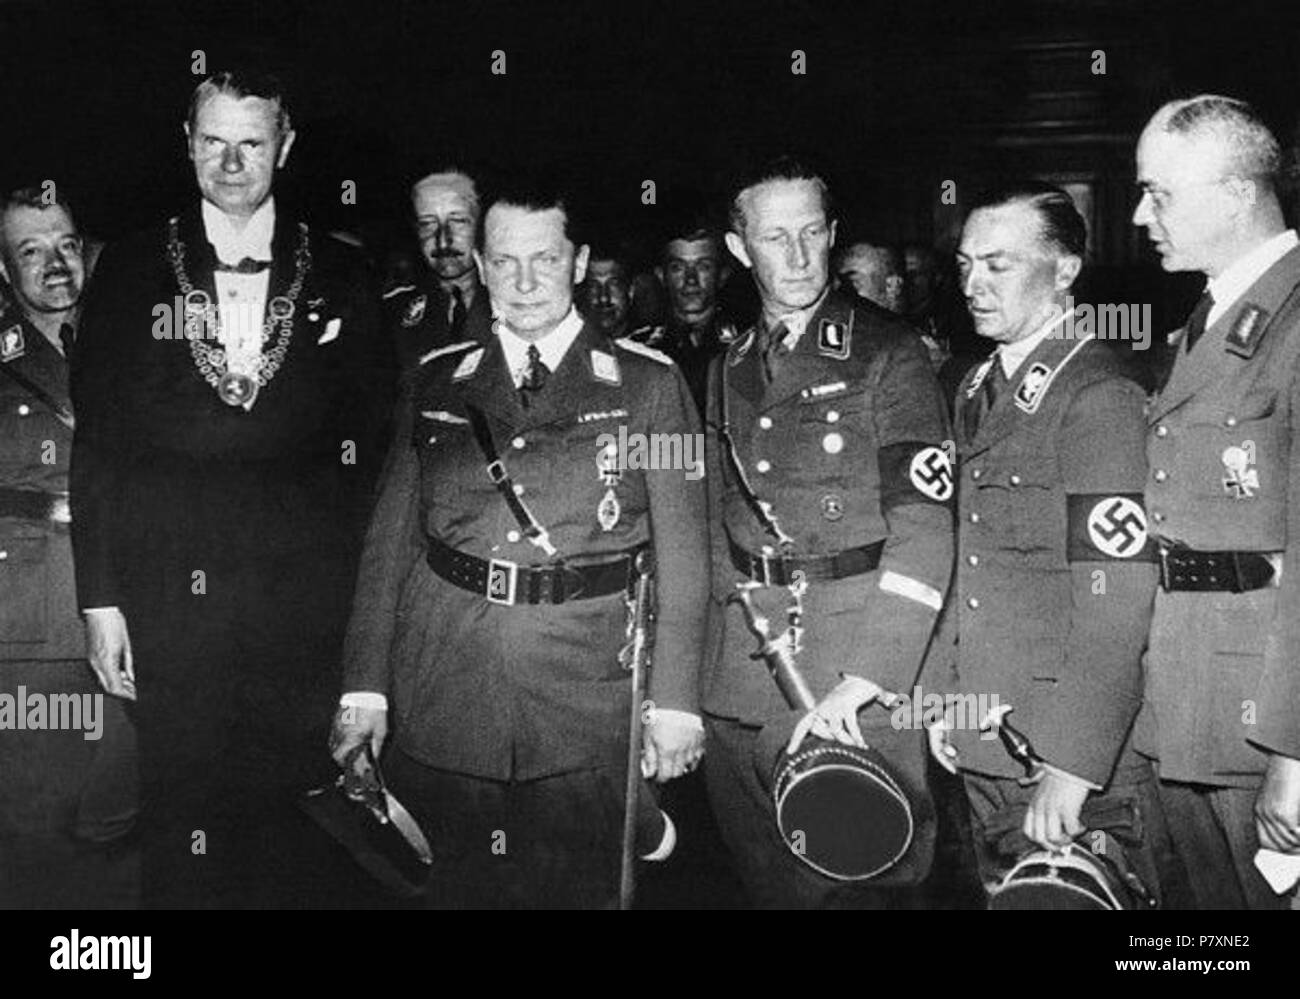 English: Gathering of high-ranking Nazi officials in Berlin. Left to right: Georg von Detten (chief of the Political Office of the SA Supreme Command), Heinrich Sahm (Lord Mayor of Berlin), August Wilhelm of Prussia (SA-Group Leader), Hermann Goering (Minister President of Prussia), Lippert, Karl Ernst (Commander of the Berlin SA) and Artur Görlitzer (Deputy-Gauleiter of Berlin). 1933 132 DettenSahmGoeringLippertErnstGoerlitzer Stock Photo